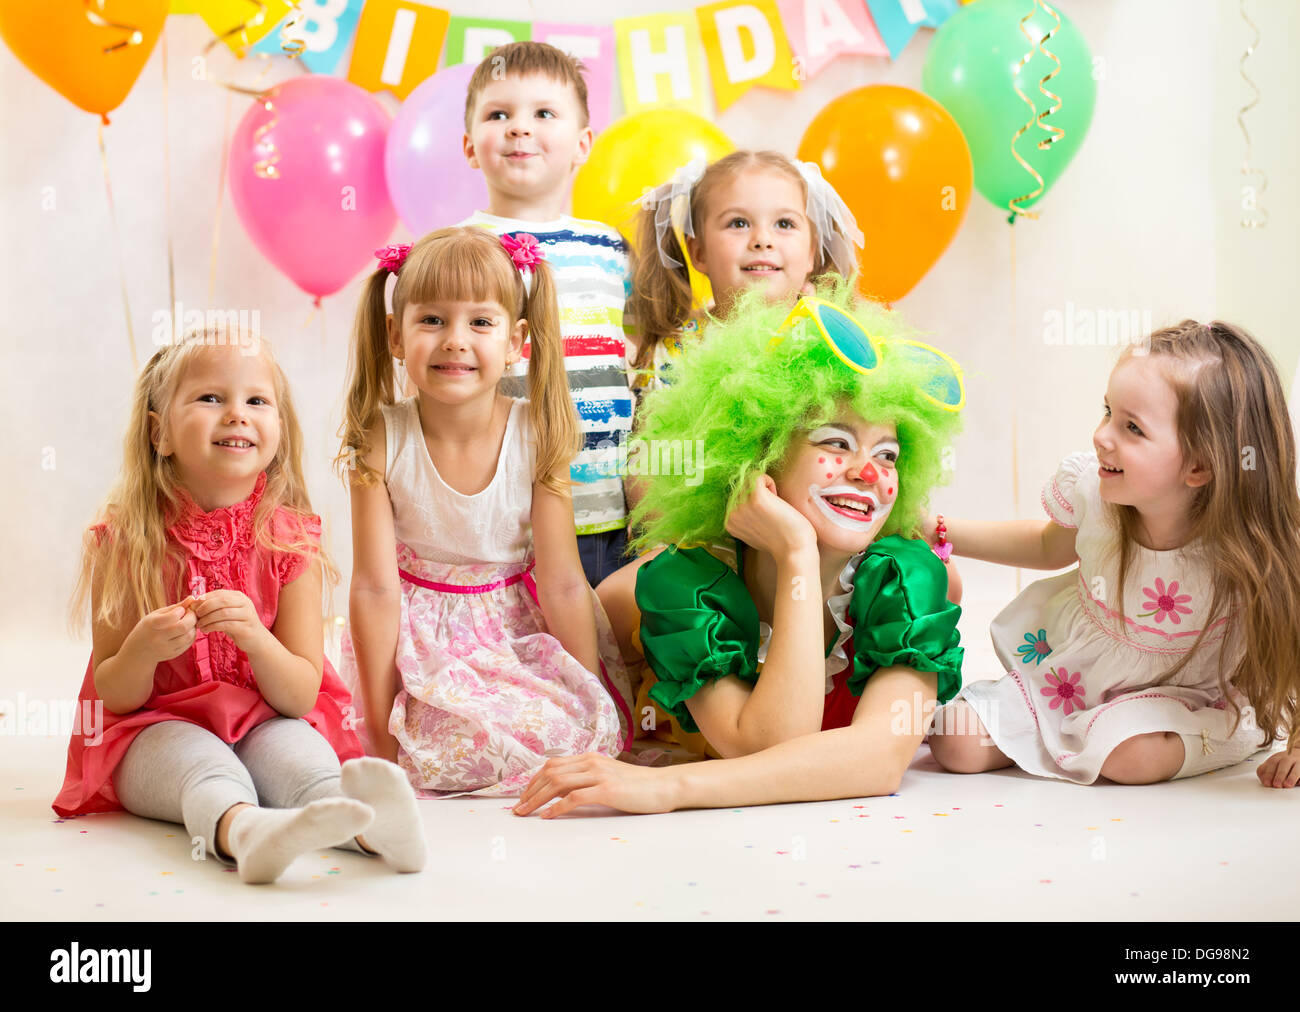 jolly kids group and clown on birthday party Stock Photo